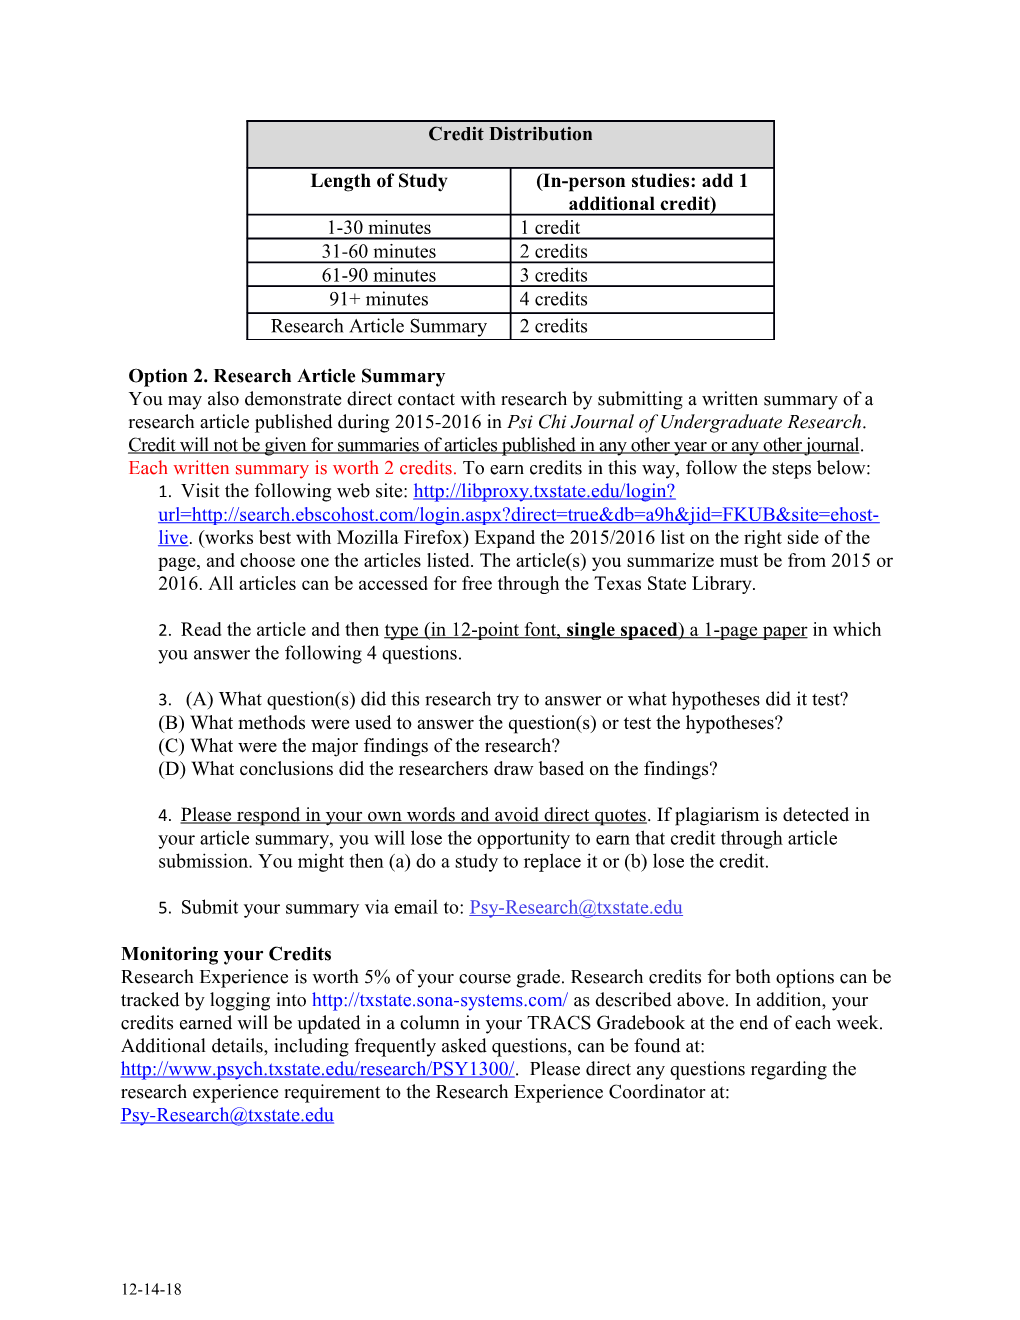 Spring 2019 PSY 1300 Research Experience: Participant Guidelines